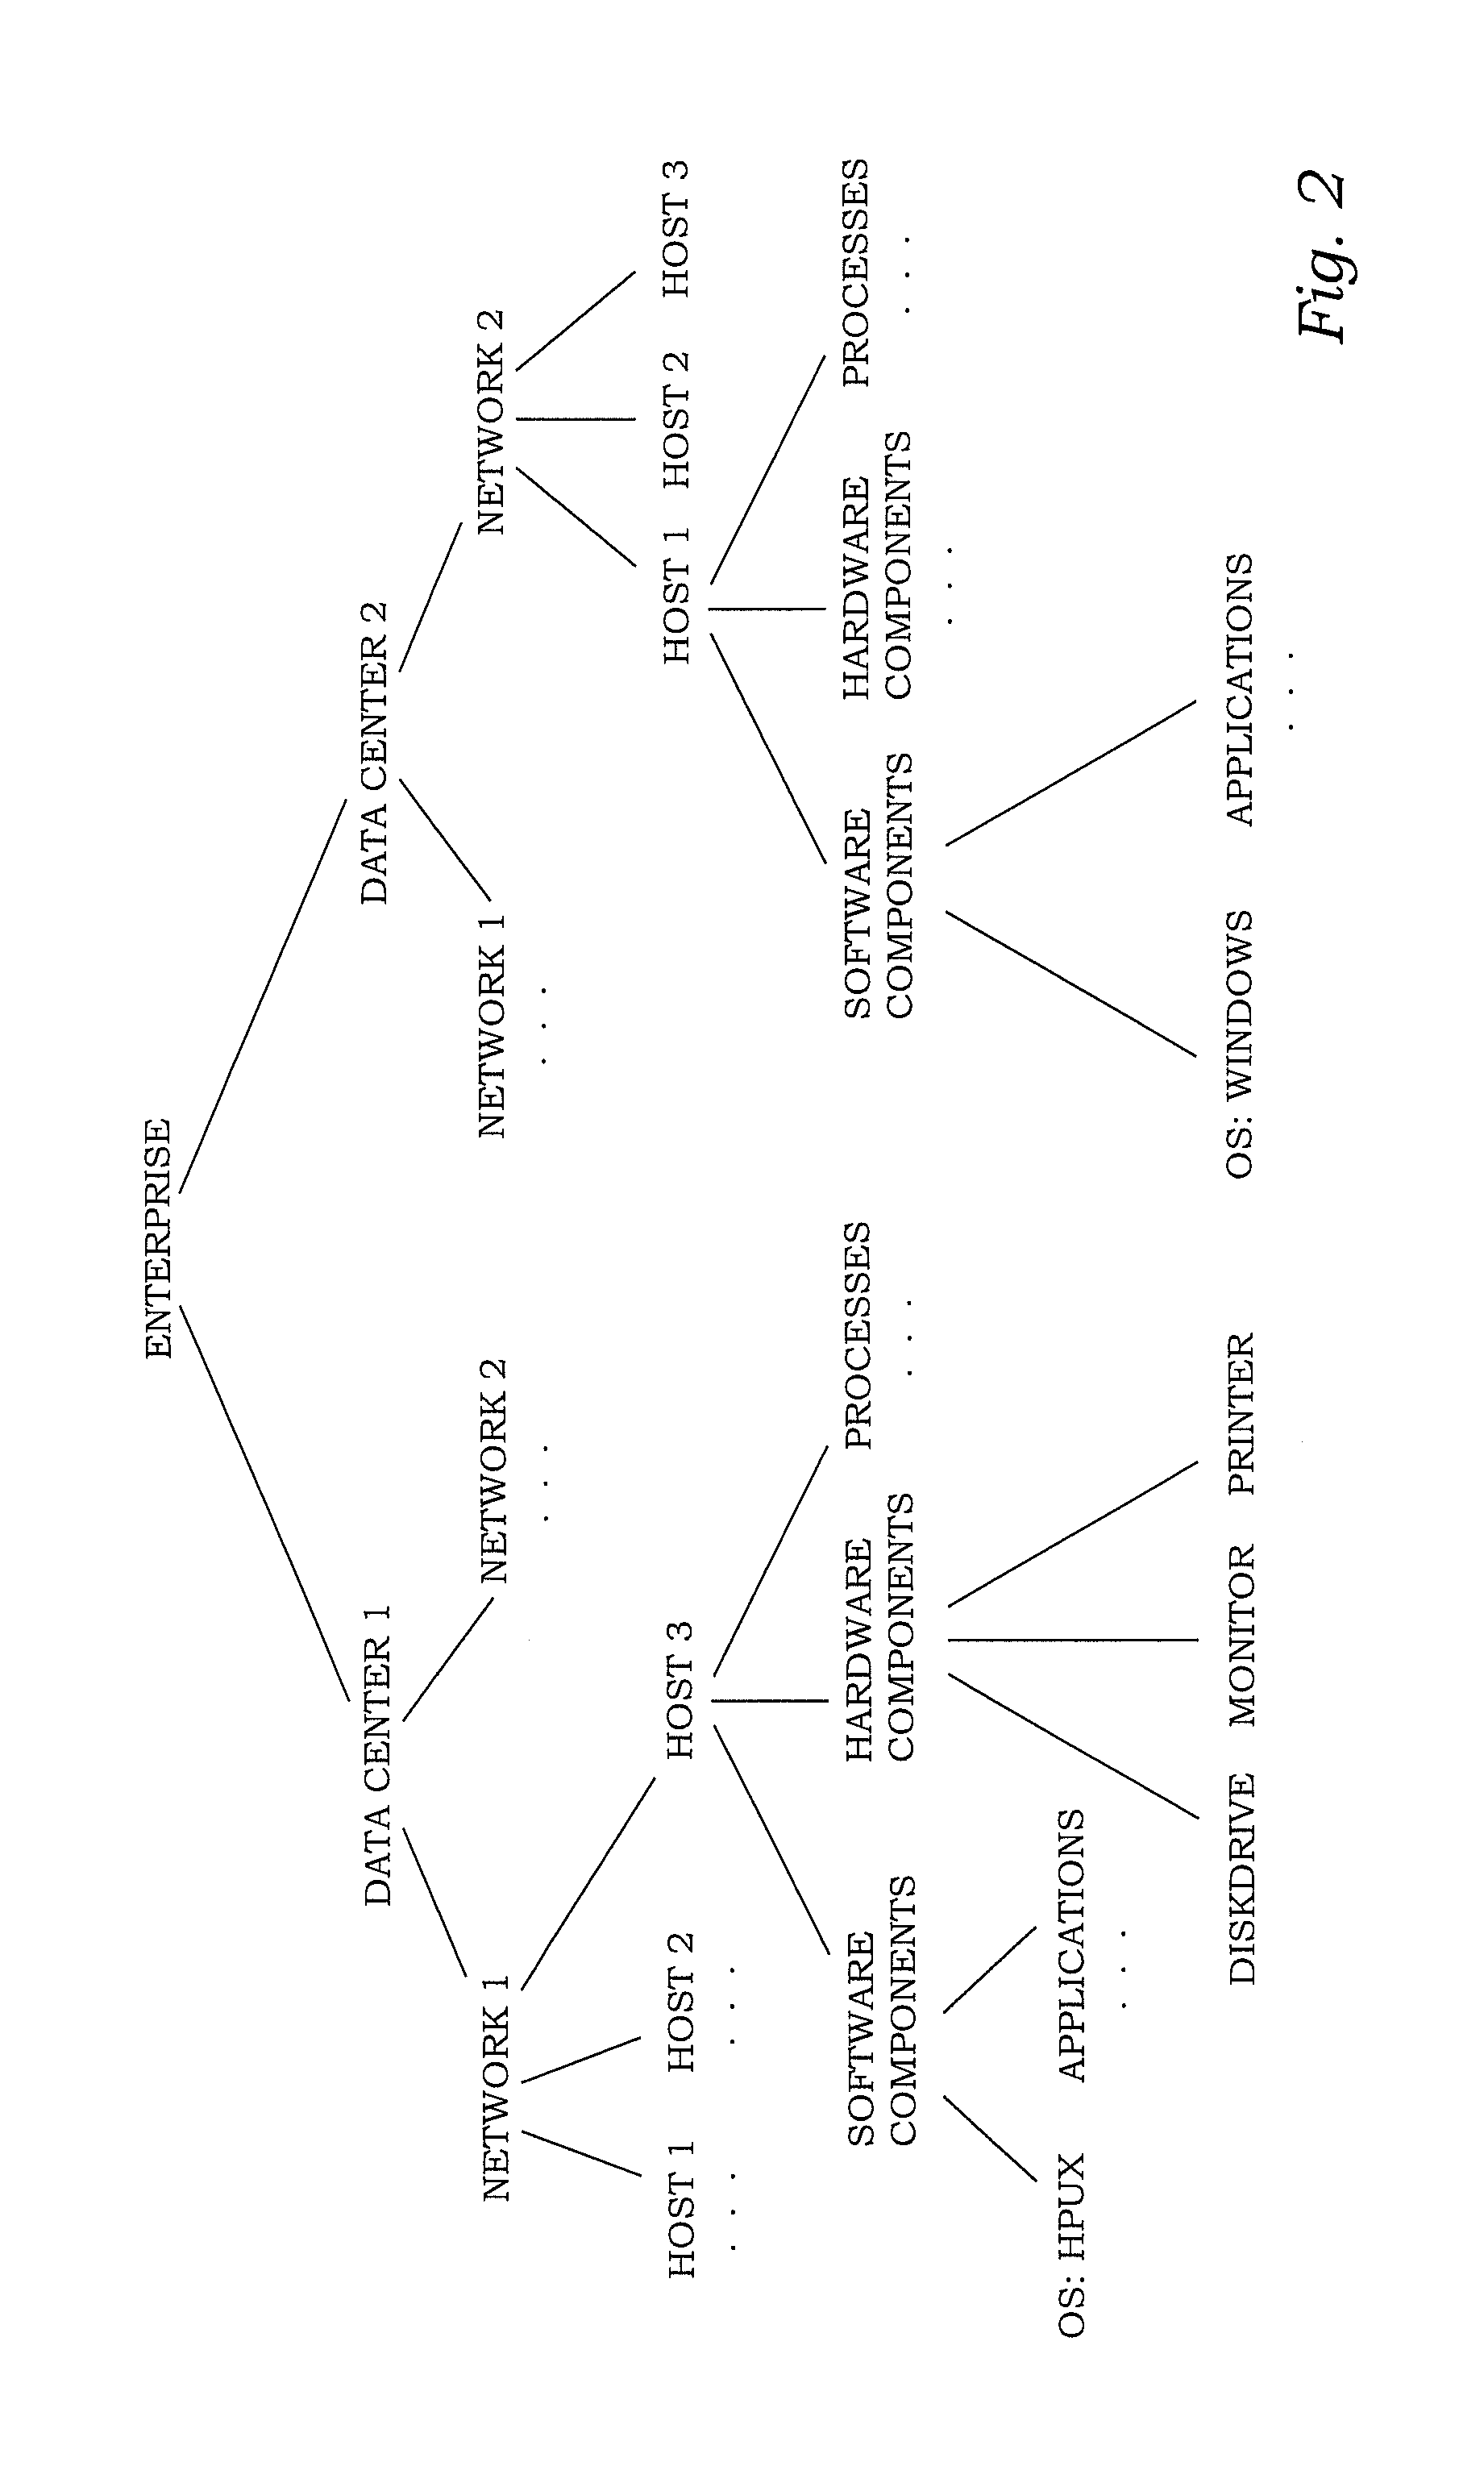 Retrieving configuration records from a configuration management database